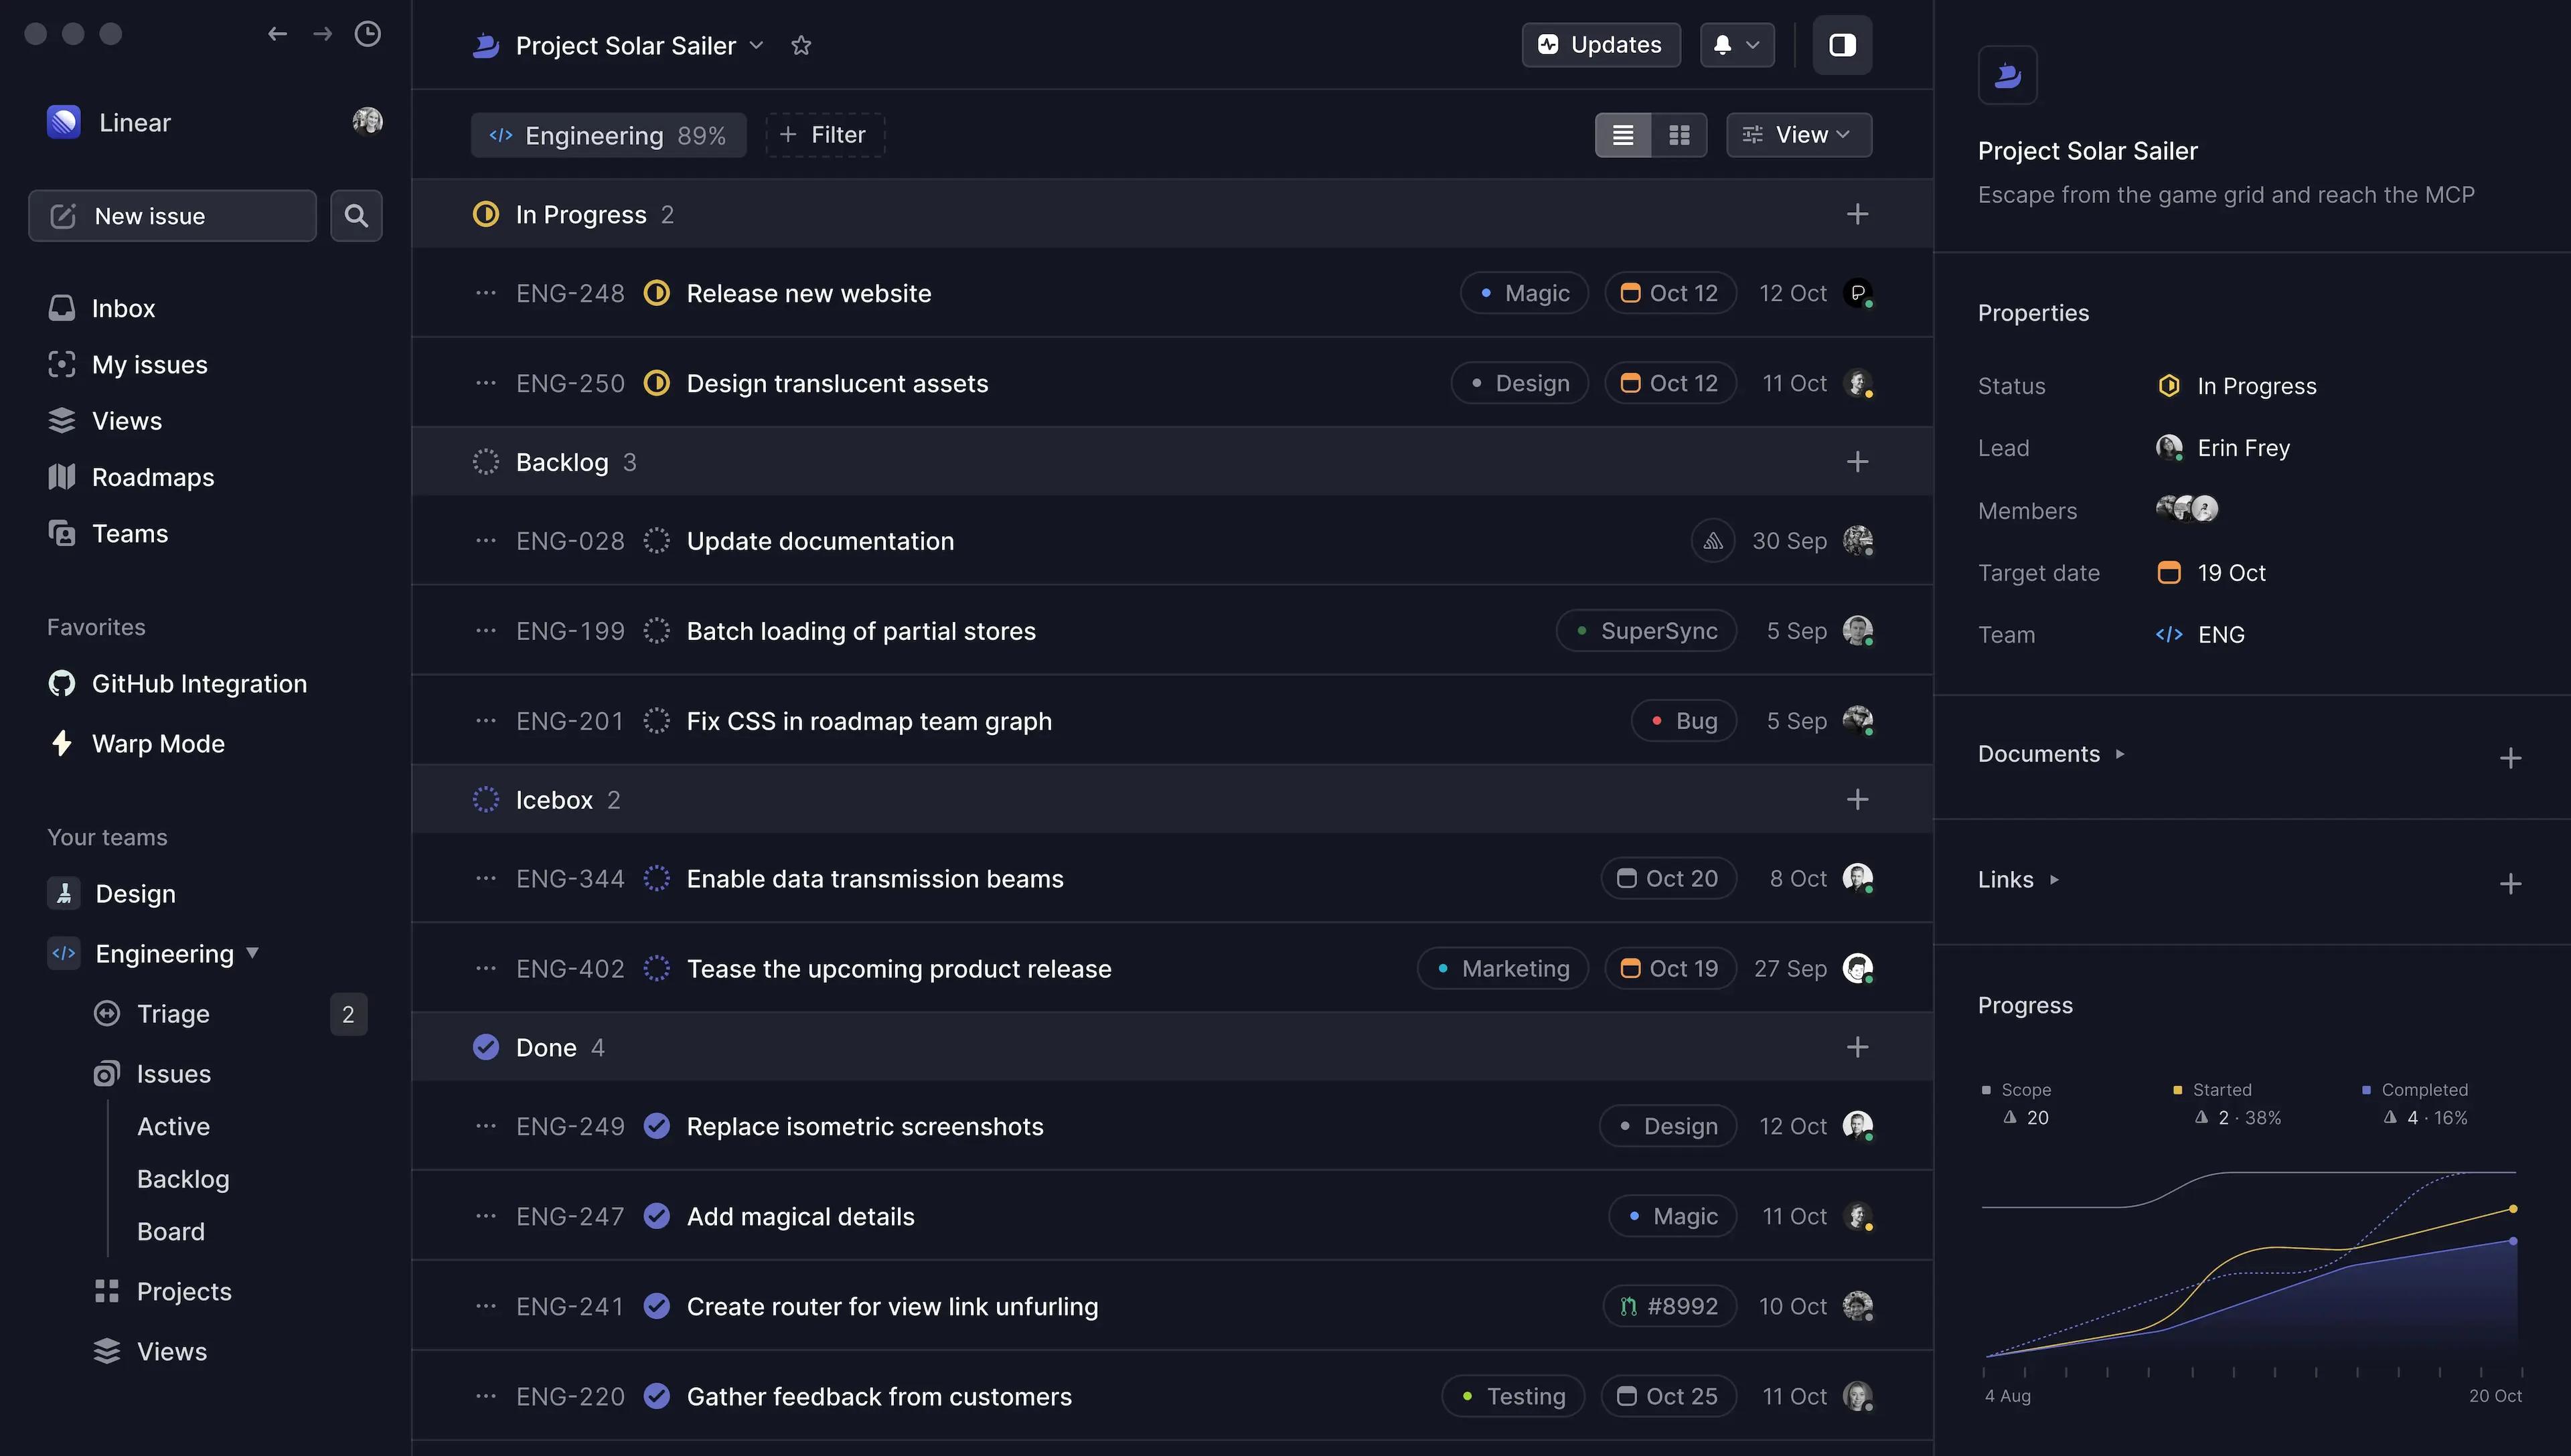 Screenshot of the Linear app showing the sidebar for the Encom workspace and a few of their projects in the roadmap.